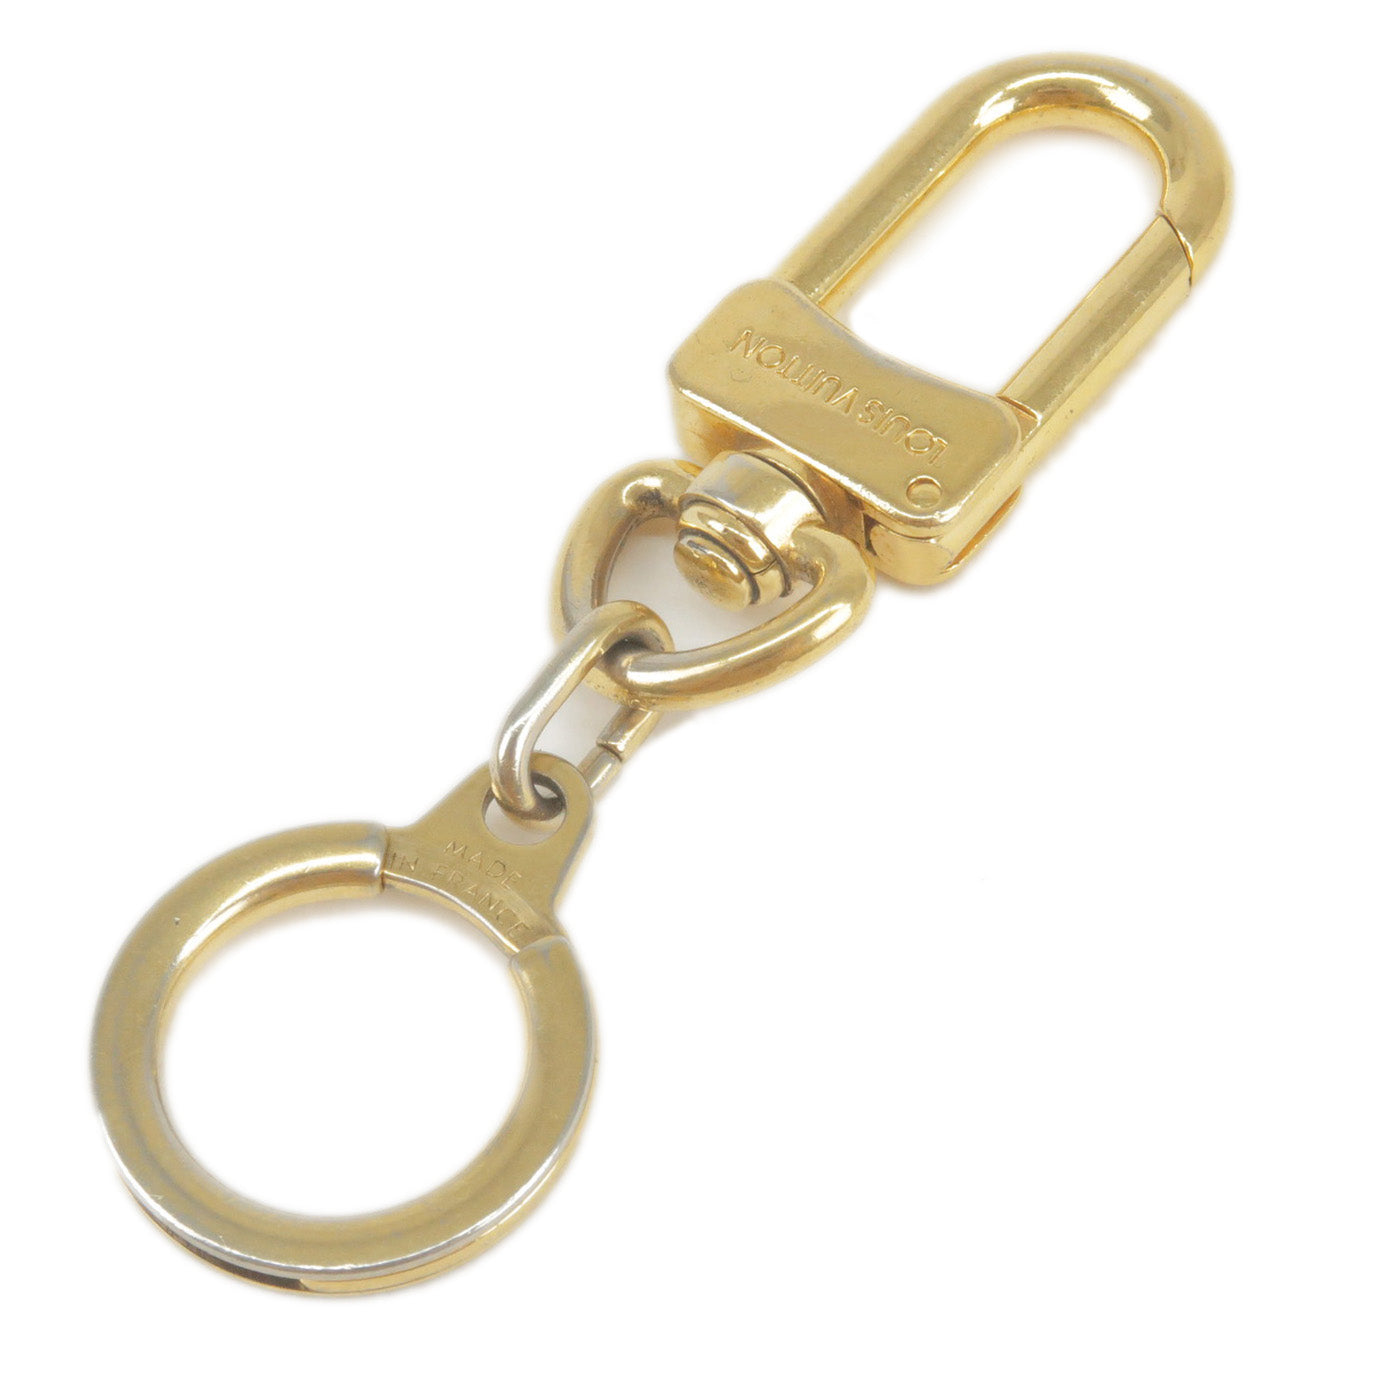 Louis Vuitton Keychain Anocre Gold M62694 bag Charm Key ring beauty  condition